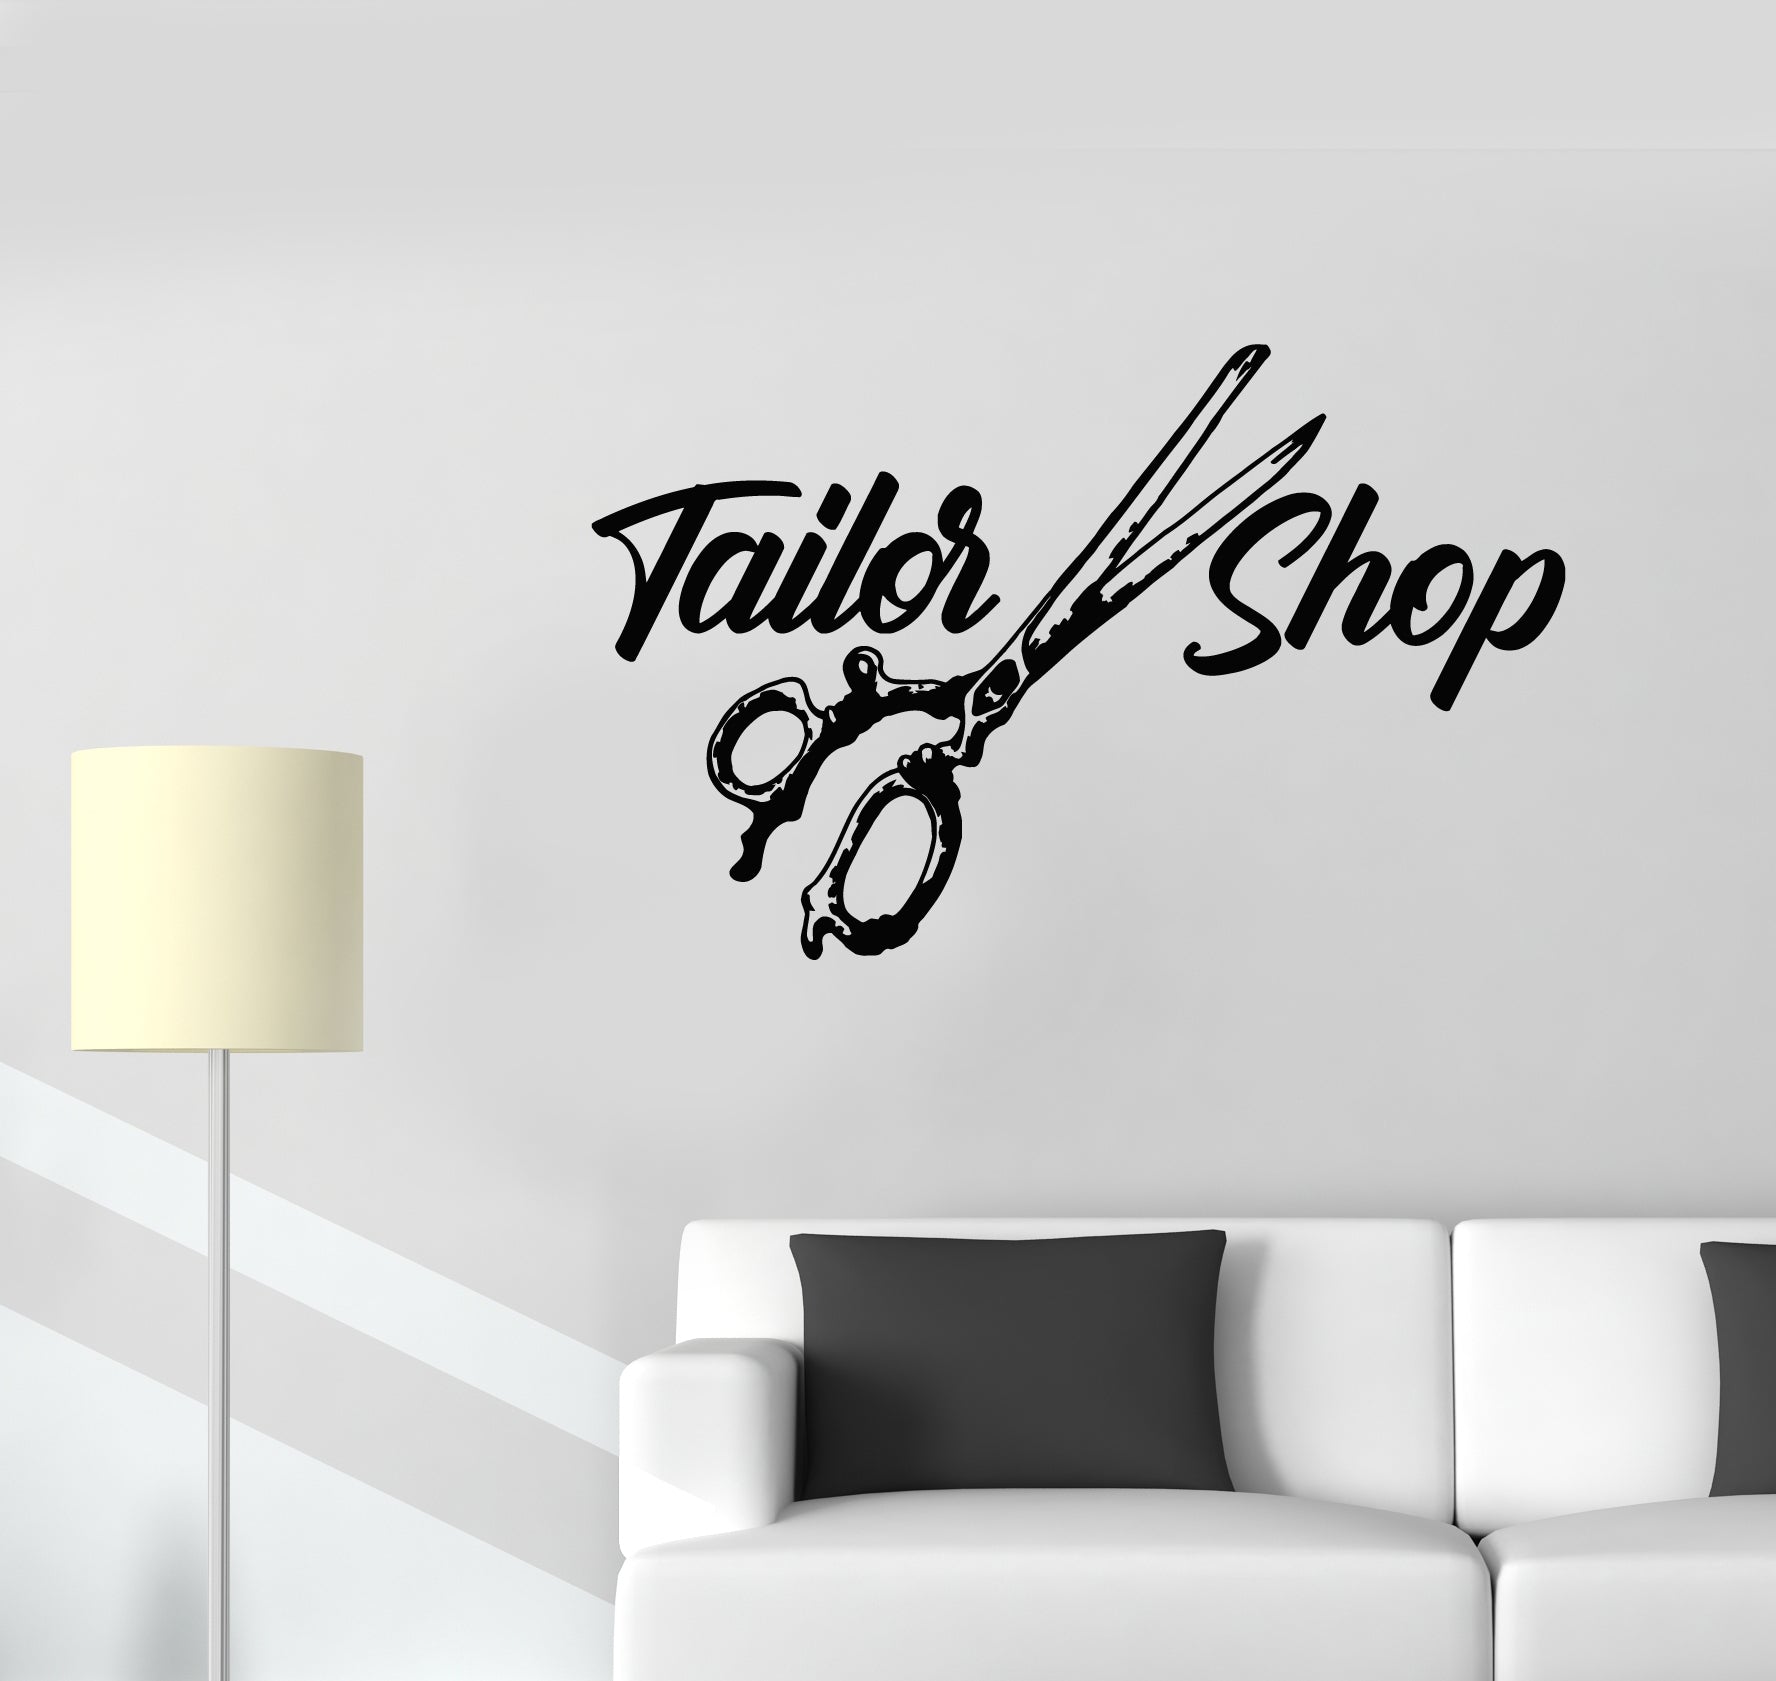 ANFRJJI Sewing Tailor's Wall Decal - Removable PVC Sticker with Sewing Forever Housework Whenever Quote and Sewing Machine Scissors Graphic - Effect 2